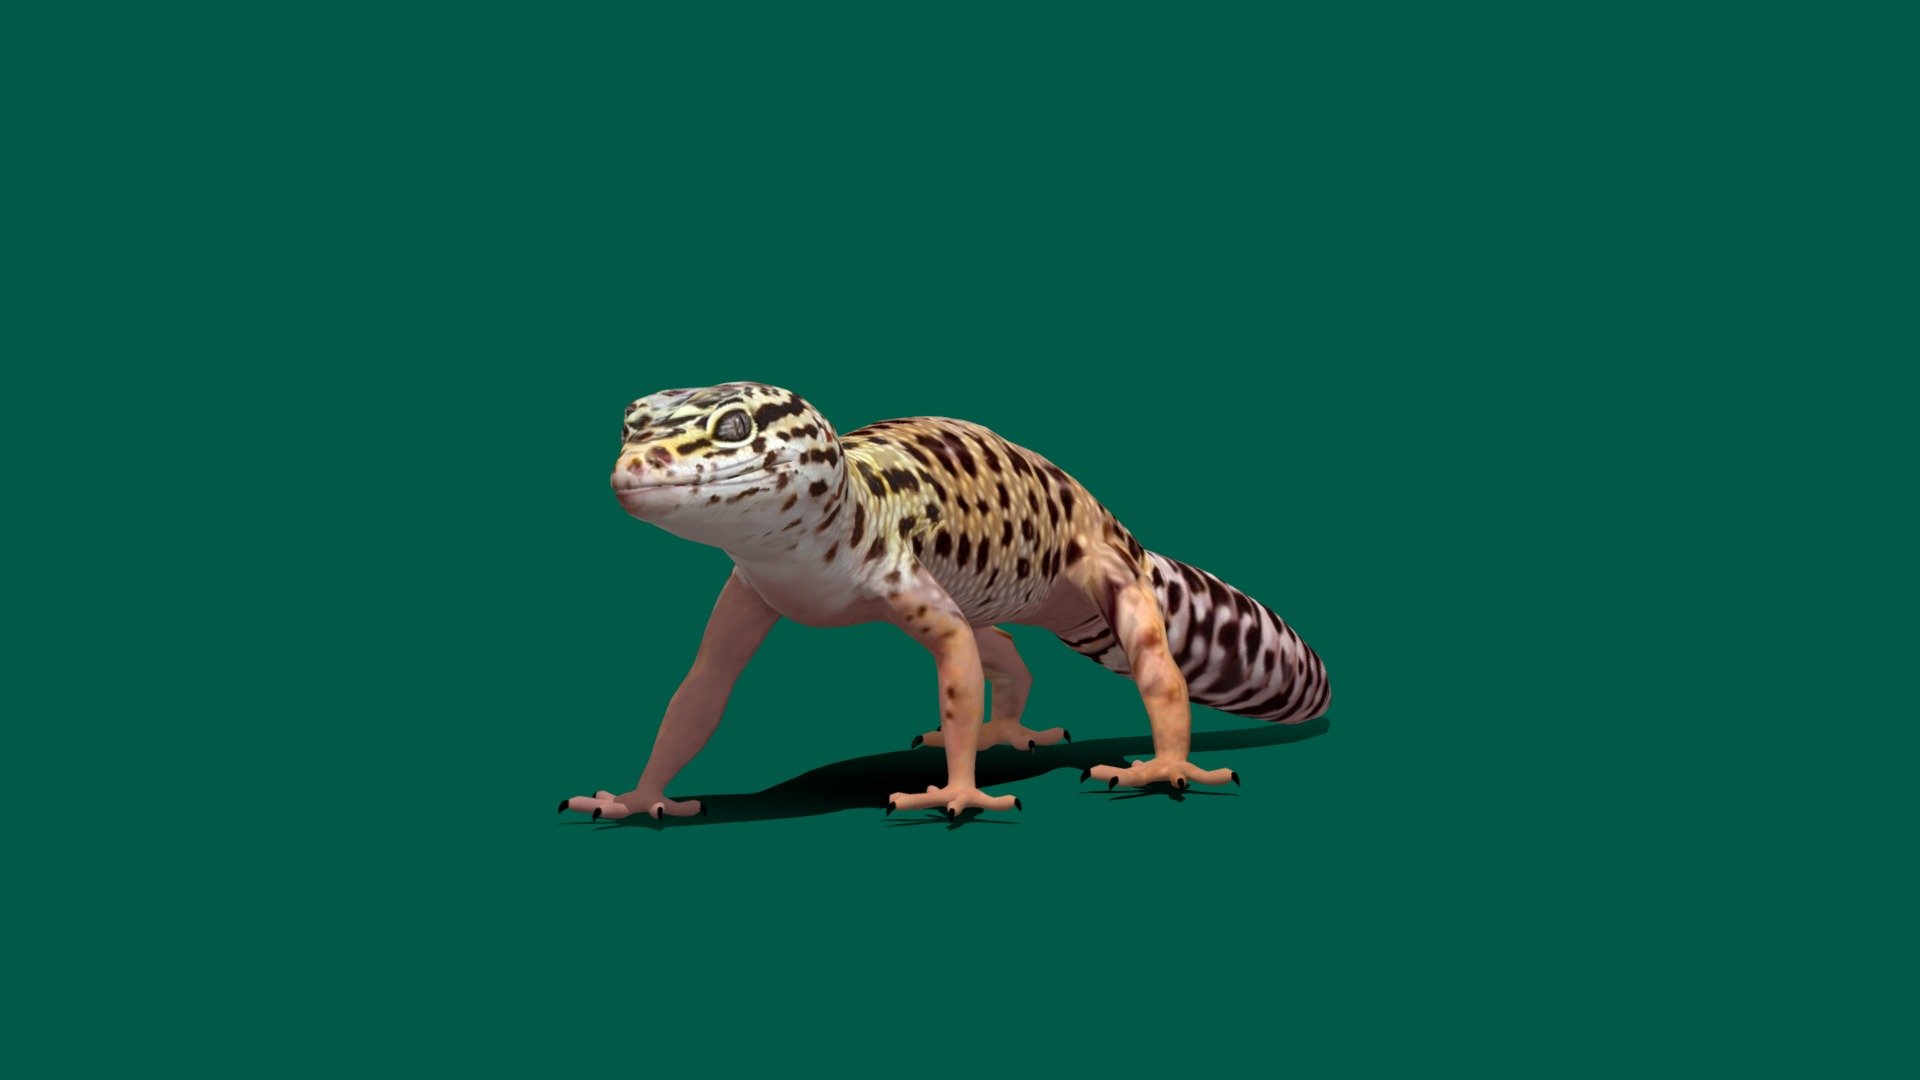 Leopard  Gecko
Idle to Walk Run Animation
Unreal Unity Compatible 
4K PBR Textures Material 
Diffuse,metallic,Roughness,Specular ,AO, Normal Map .
Ref

The leopard gecko or common leopard gecko is a ground-dwelling lizard native to the rocky dry grassland and desert regions of Afghanistan, Iran, Pakistan, India, and Nepal. Wikipedia
Lifespan: 15 years (In the wild)
Scientific name: Eublepharis_macularius
Family: Eublepharidae
Kingdom: Animalia
Order: Squamata
Phylum: Chordata - Leopard Gecko (LowPoly) - 3D model by Nyilonelycompany 3d model